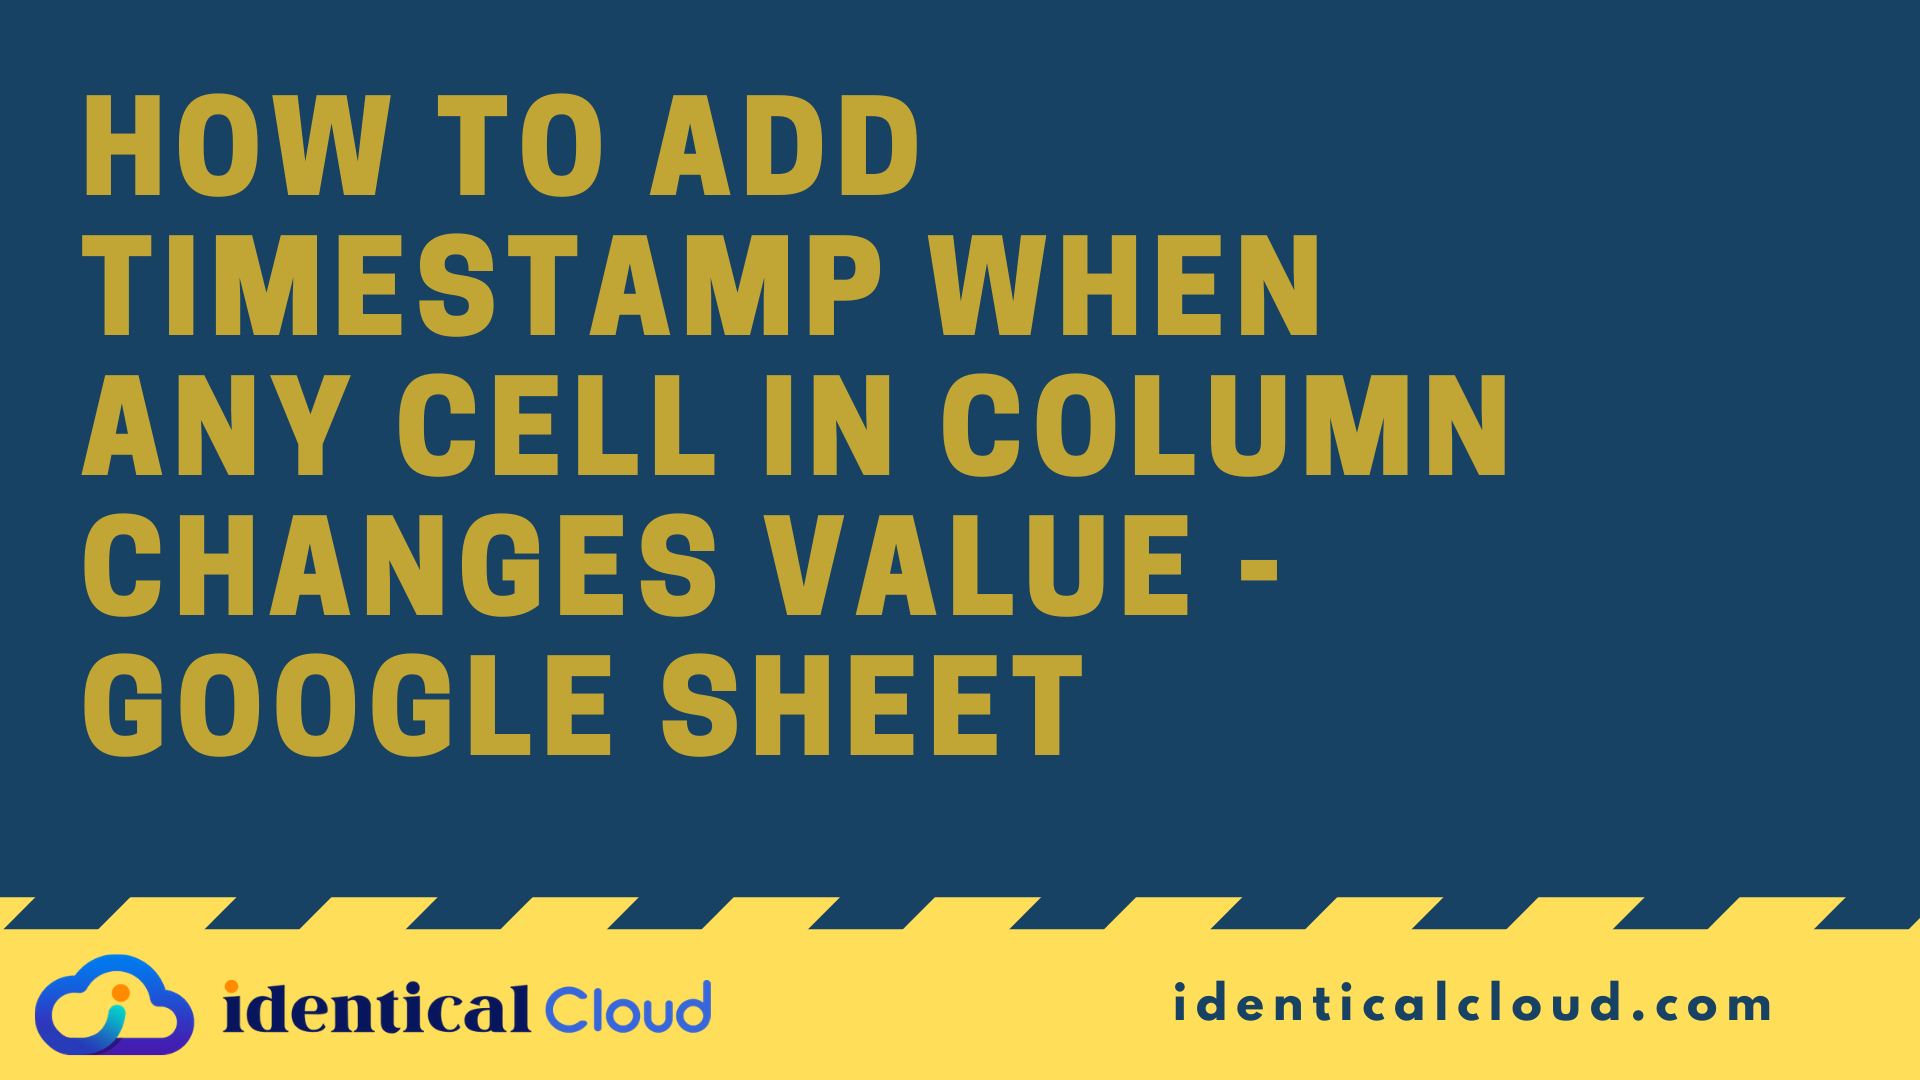 How to add timestamp when any cell in column changes value - google sheet